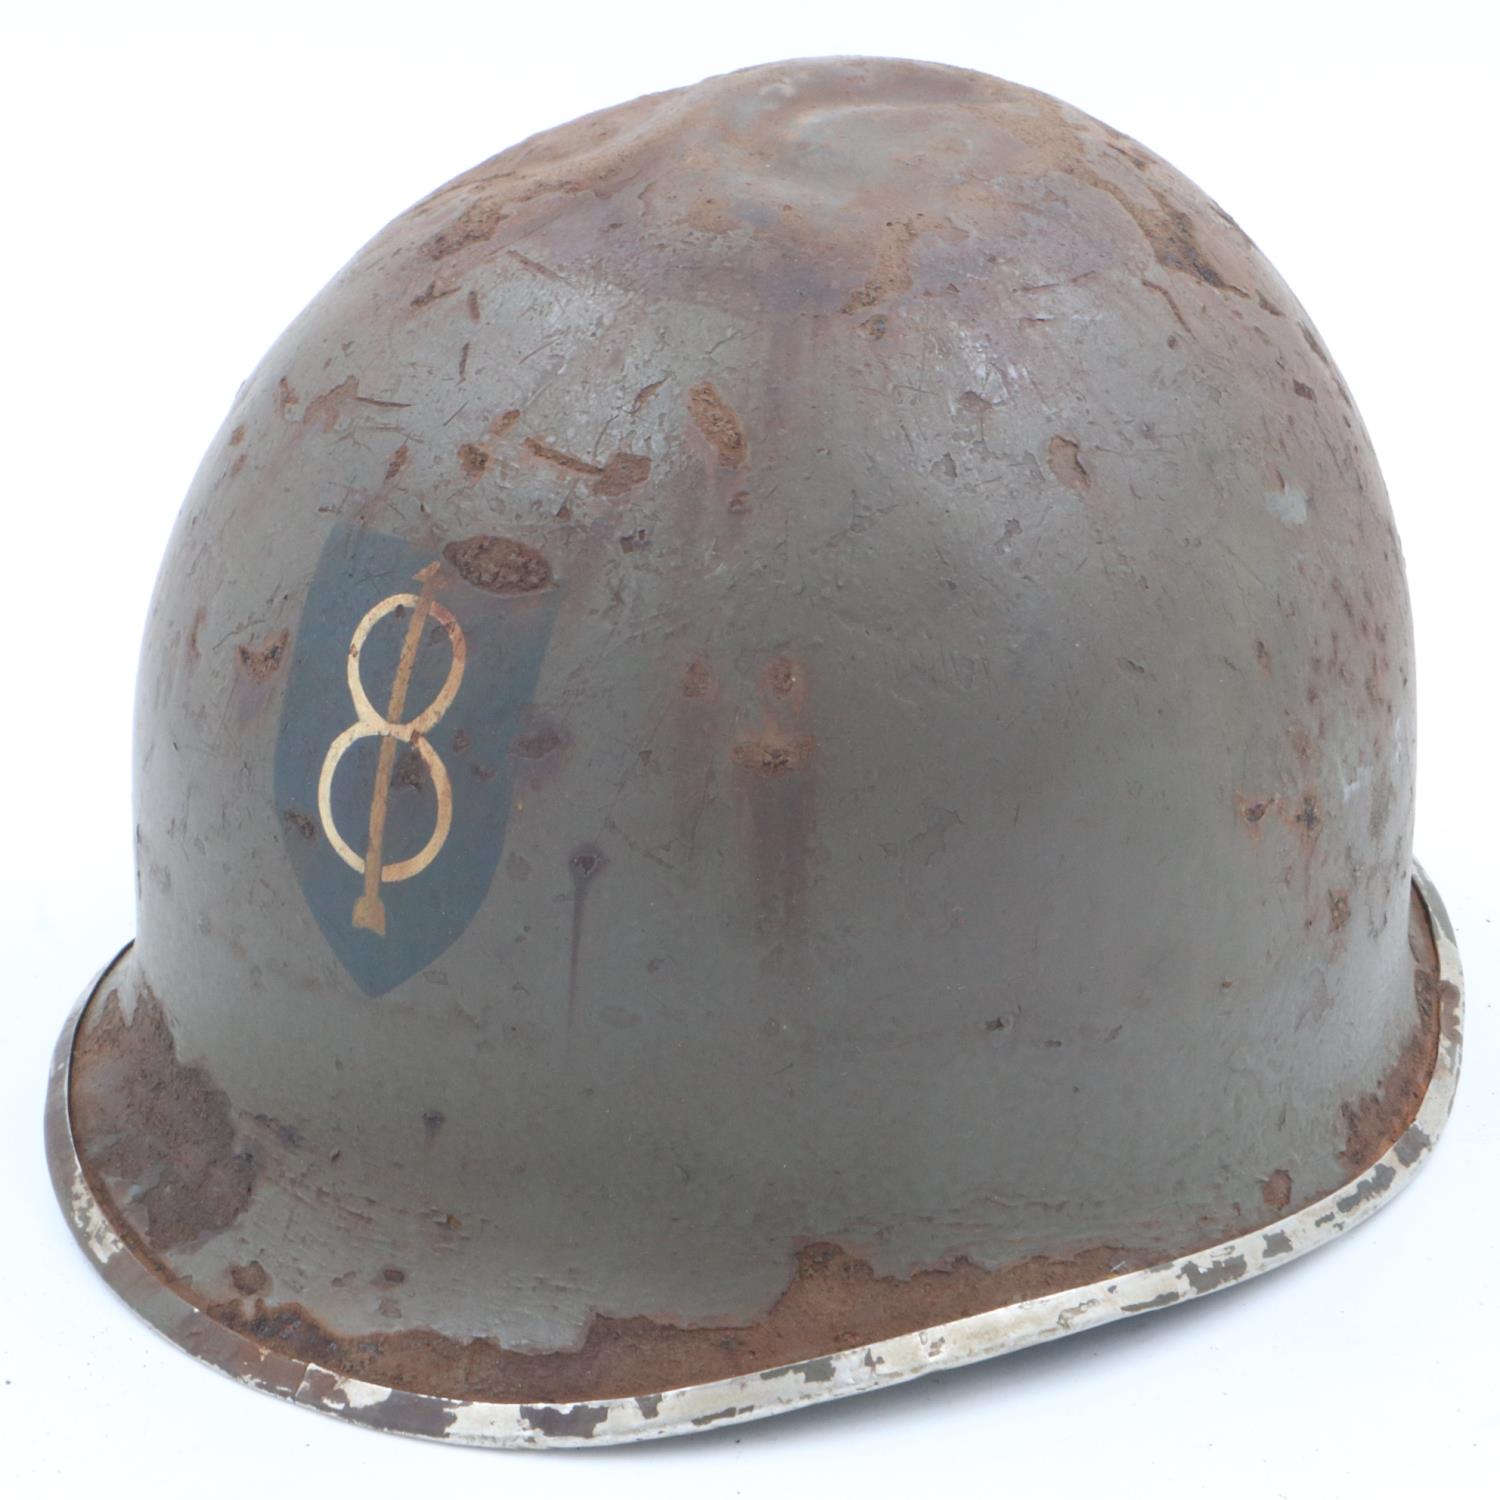 WWII US M1 Swivel Bale Helmet, with insignia of the 8th Infantry Division. This helmet has the